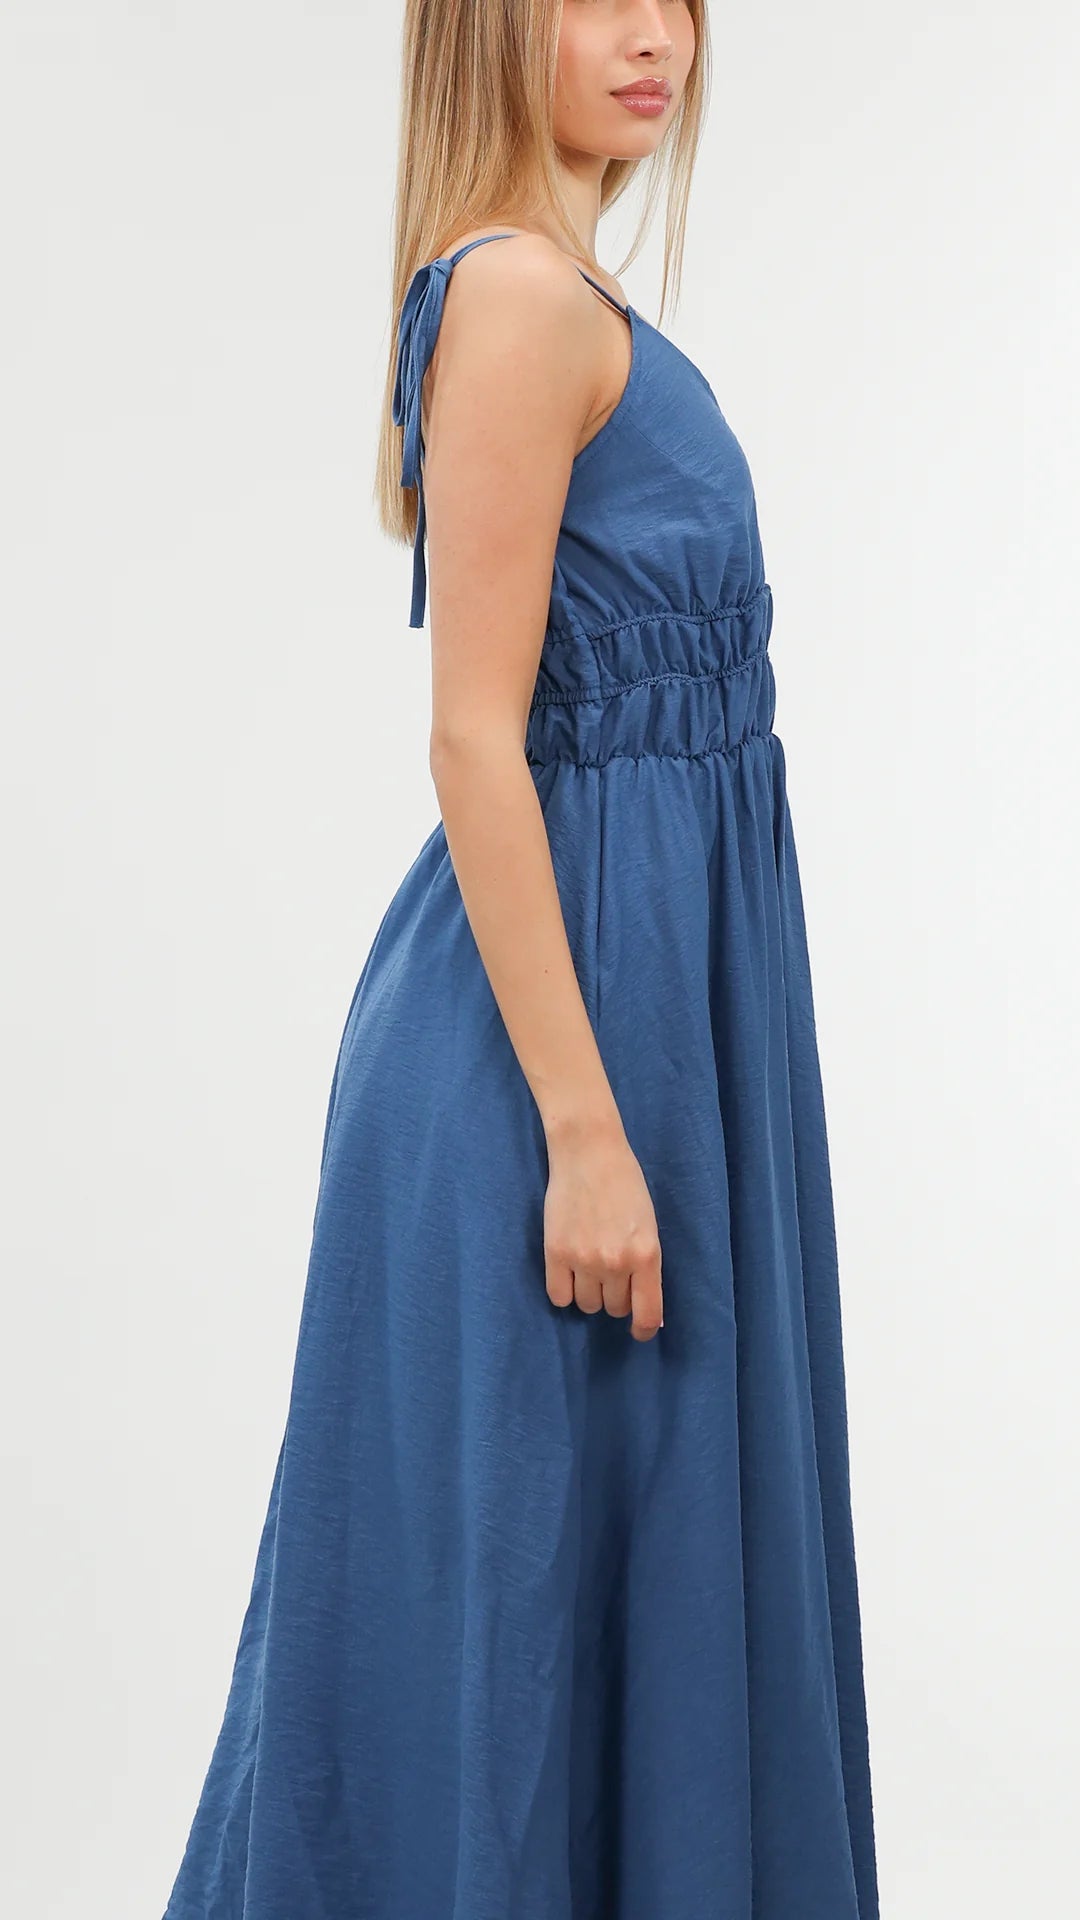 Long Dress Blue With Shoulder-Ties